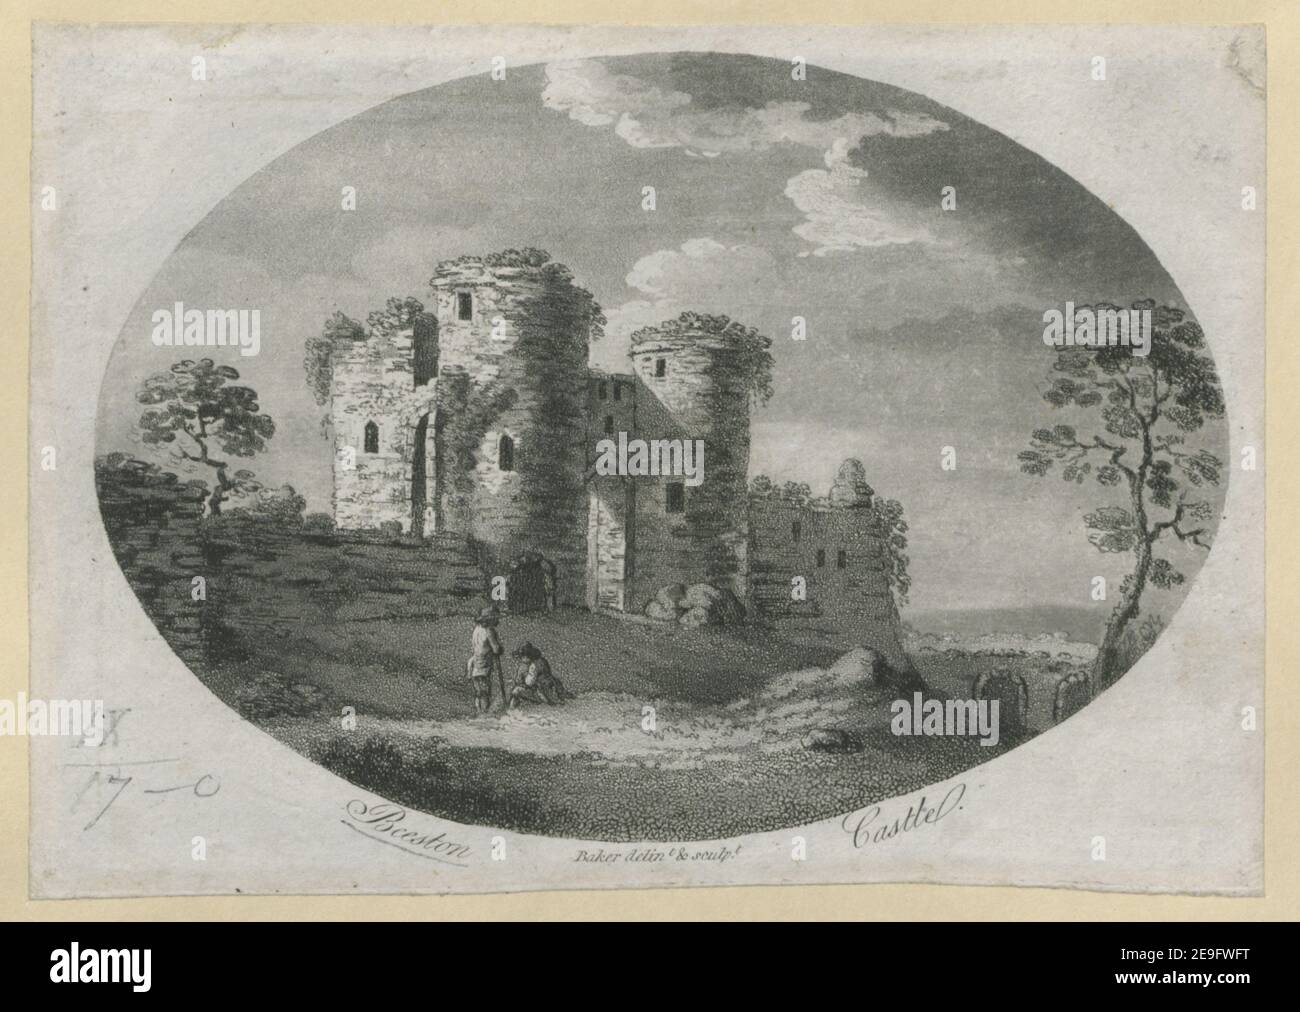 Beeston Castle in Cheshire.  Author  Baker, James 9.17.c. Place of publication: [Worcester , London] Publisher: [printed and sold by J. Tymbs, a the Cross; sold also by Robson, New Bond Street; Ottridge, Strand; White, Fleet Street; Rivingtons, St. Paul's Church Yard; Richardson, Royal Exchange; and at Taylor's architectural library, London]., Date of publication: [1795]  Item type: 1 print Medium: etching and aquatint Dimensions: sheet 11.8 x 16.7 cm [trimmed within platemark]  Former owner: George III, King of Great Britain, 1738-1820 Stock Photo